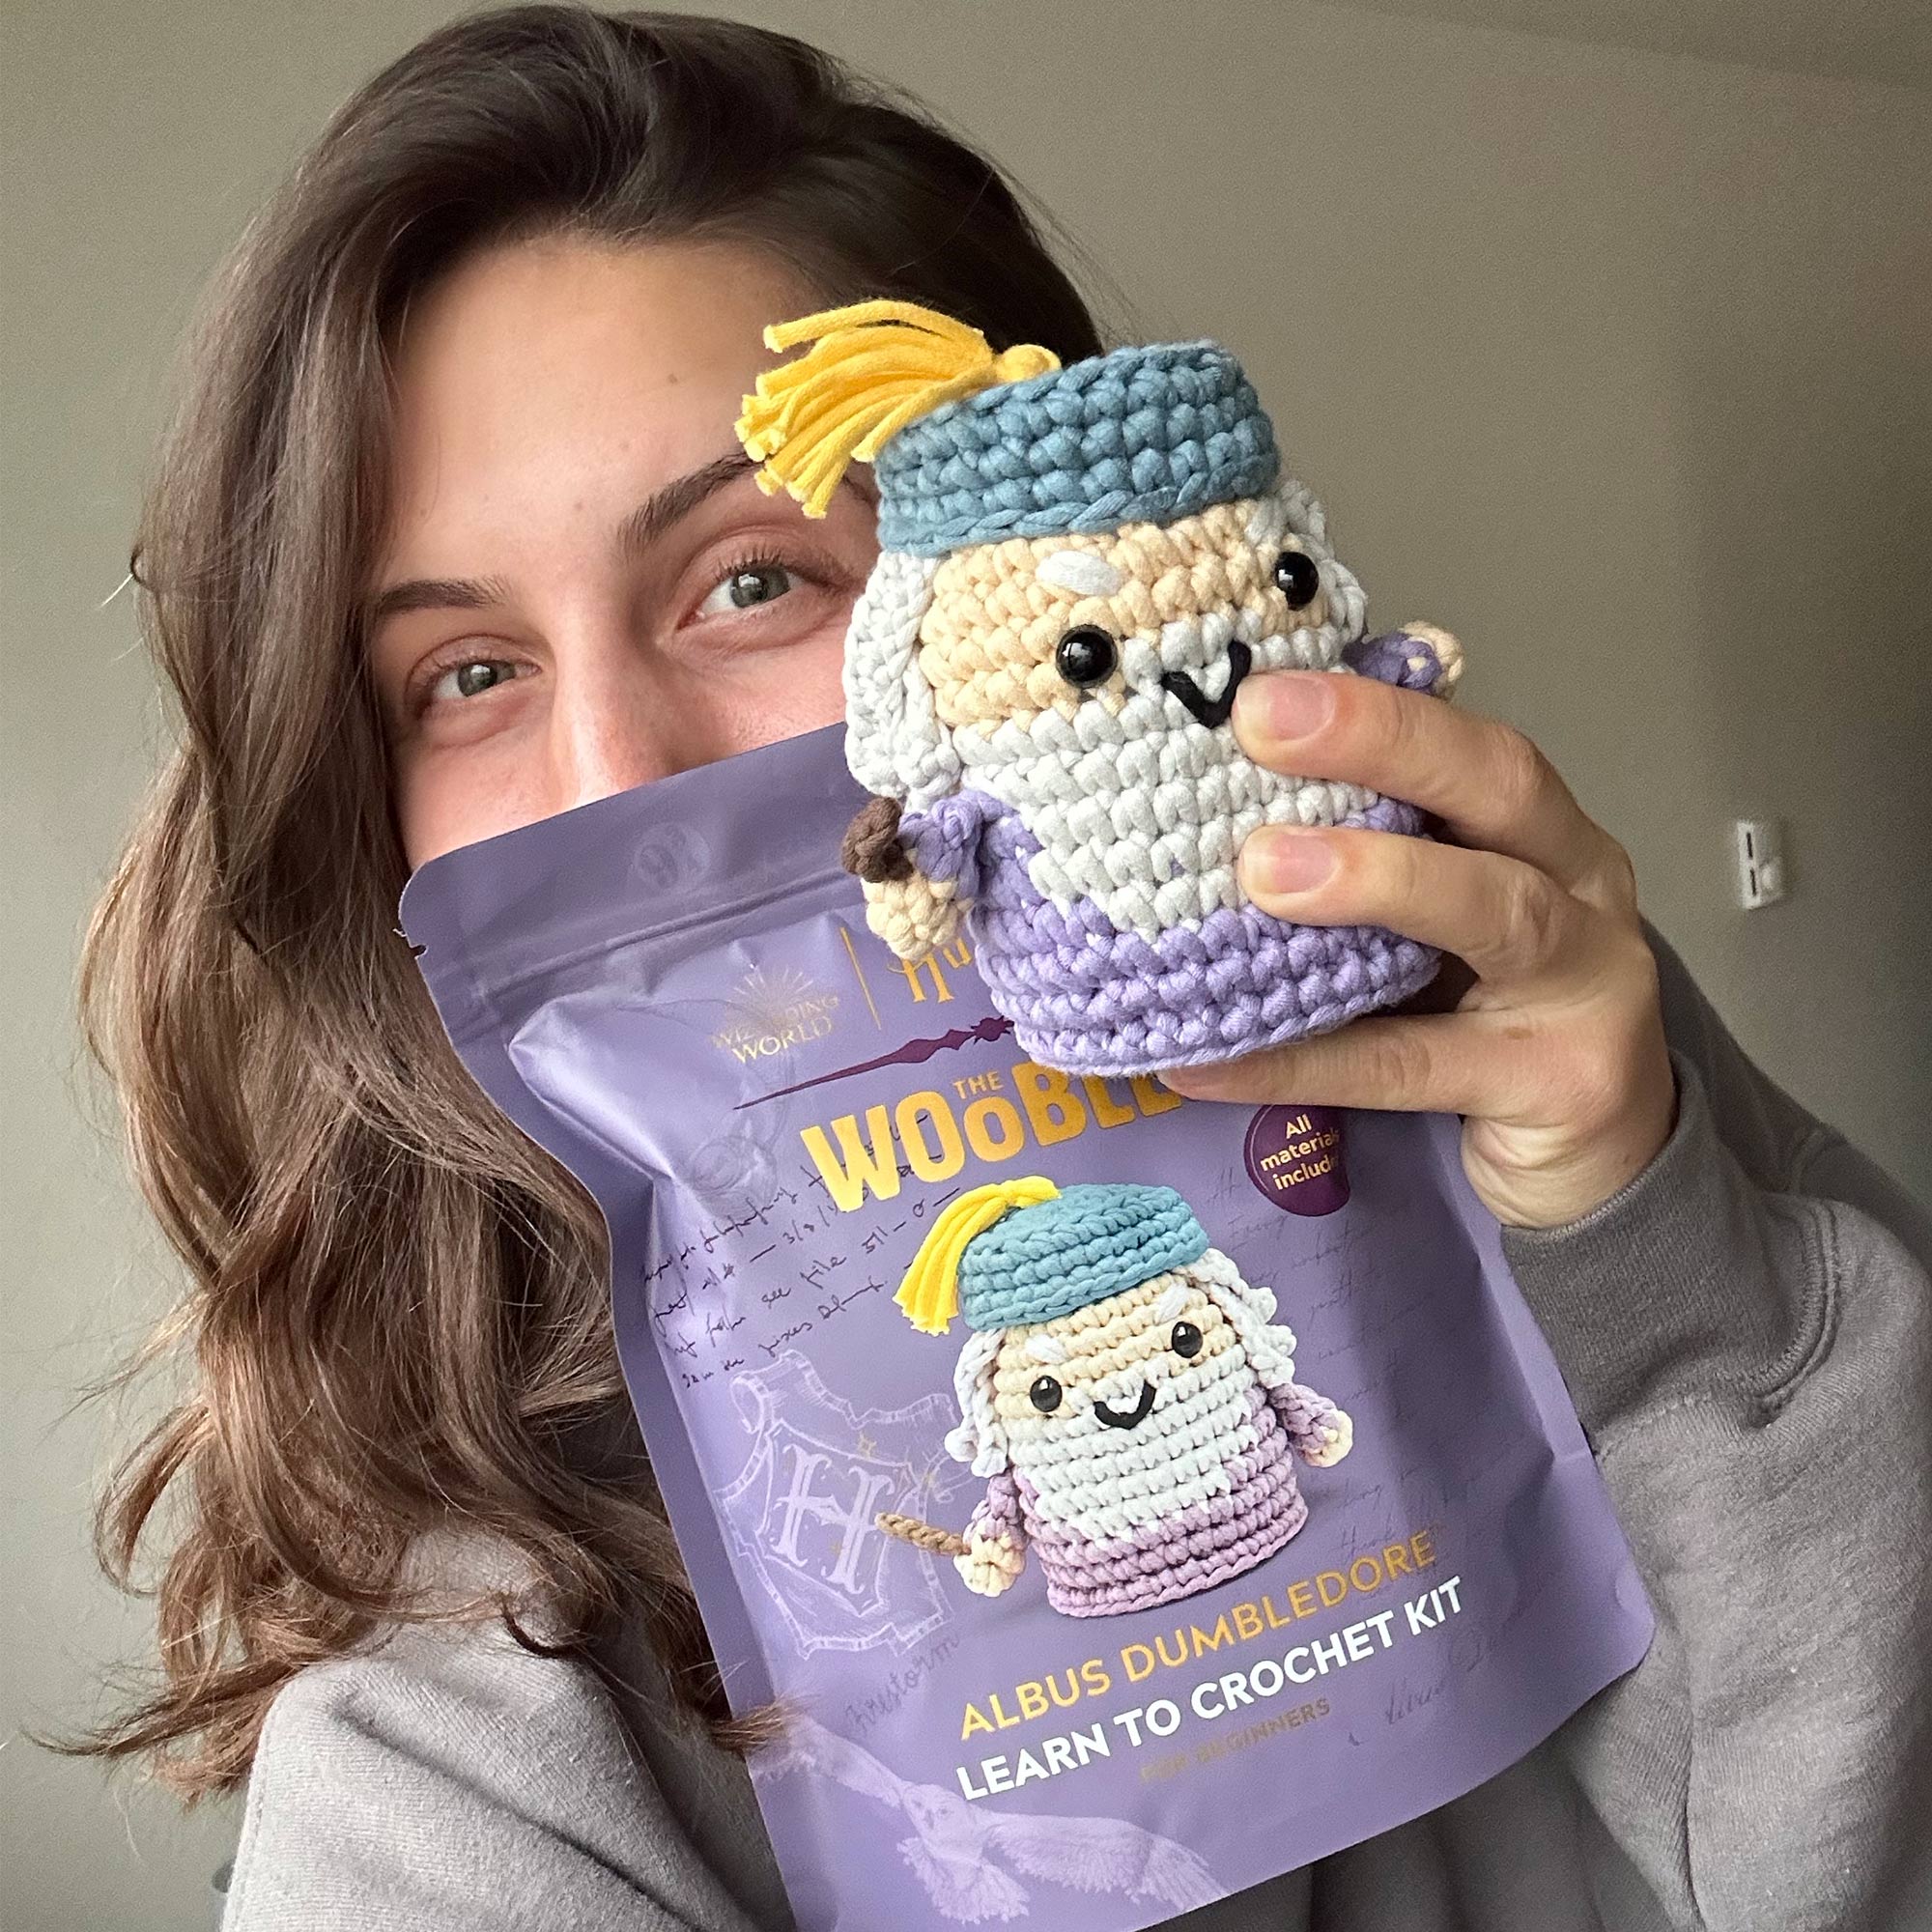 Mamta ✨ Harry Potter Lifestyle on Instagram: Learn to Crochet with these  adorable kits from the new Harry Potter x The Woobles collection  (AD/Gifted) ✨ I've got the Harry Potter, Lord Voldemort